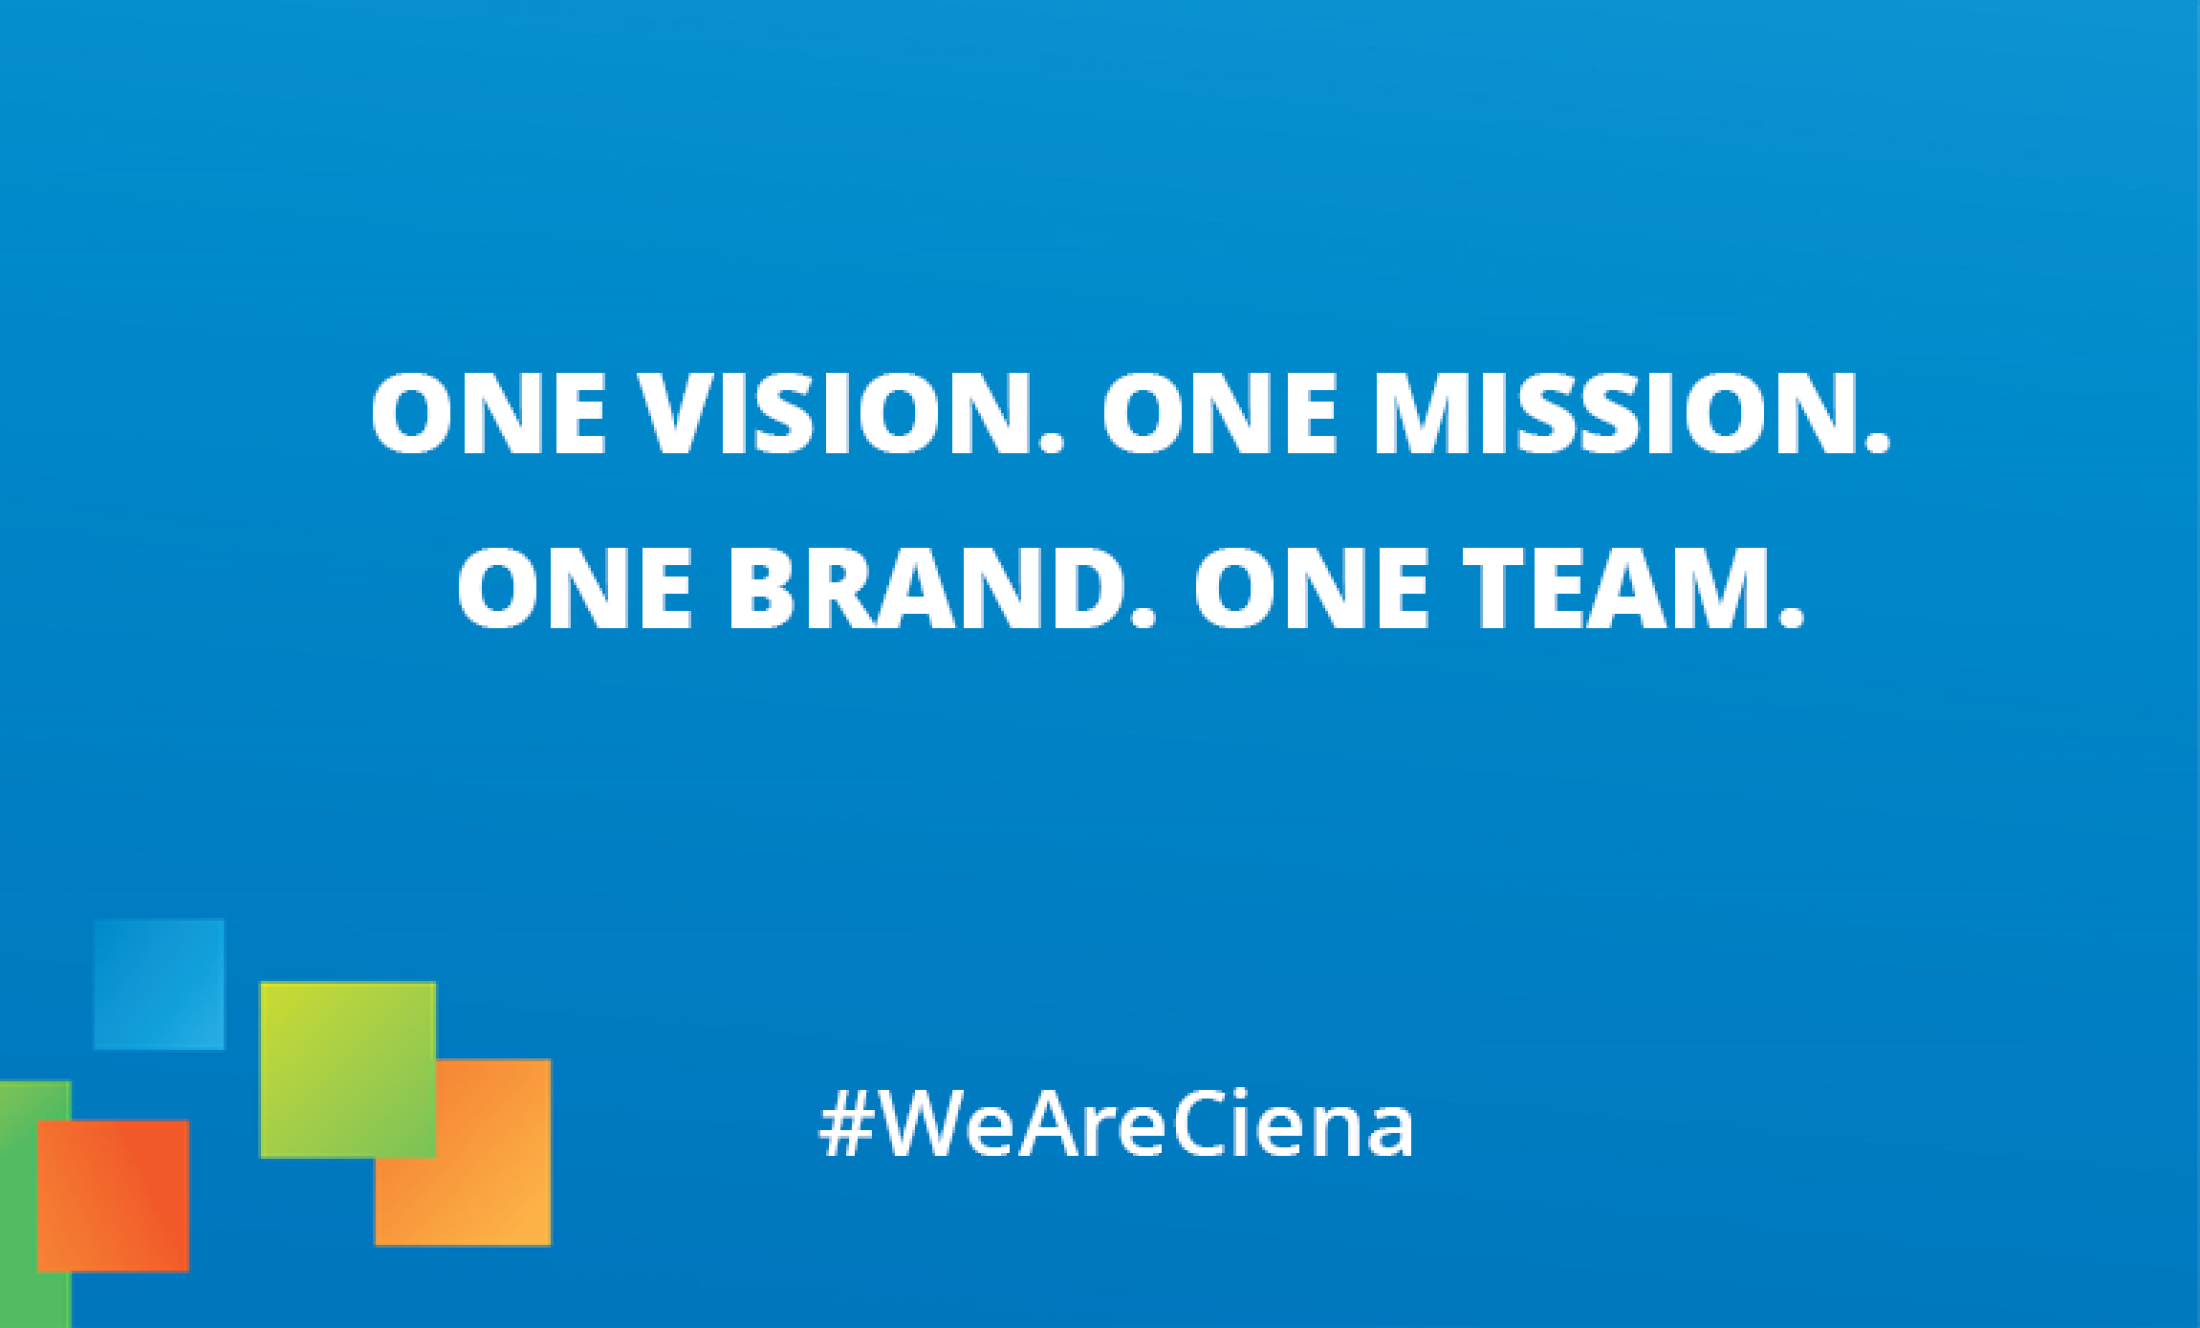 One Vision. One Mission. One Brand. One Team.